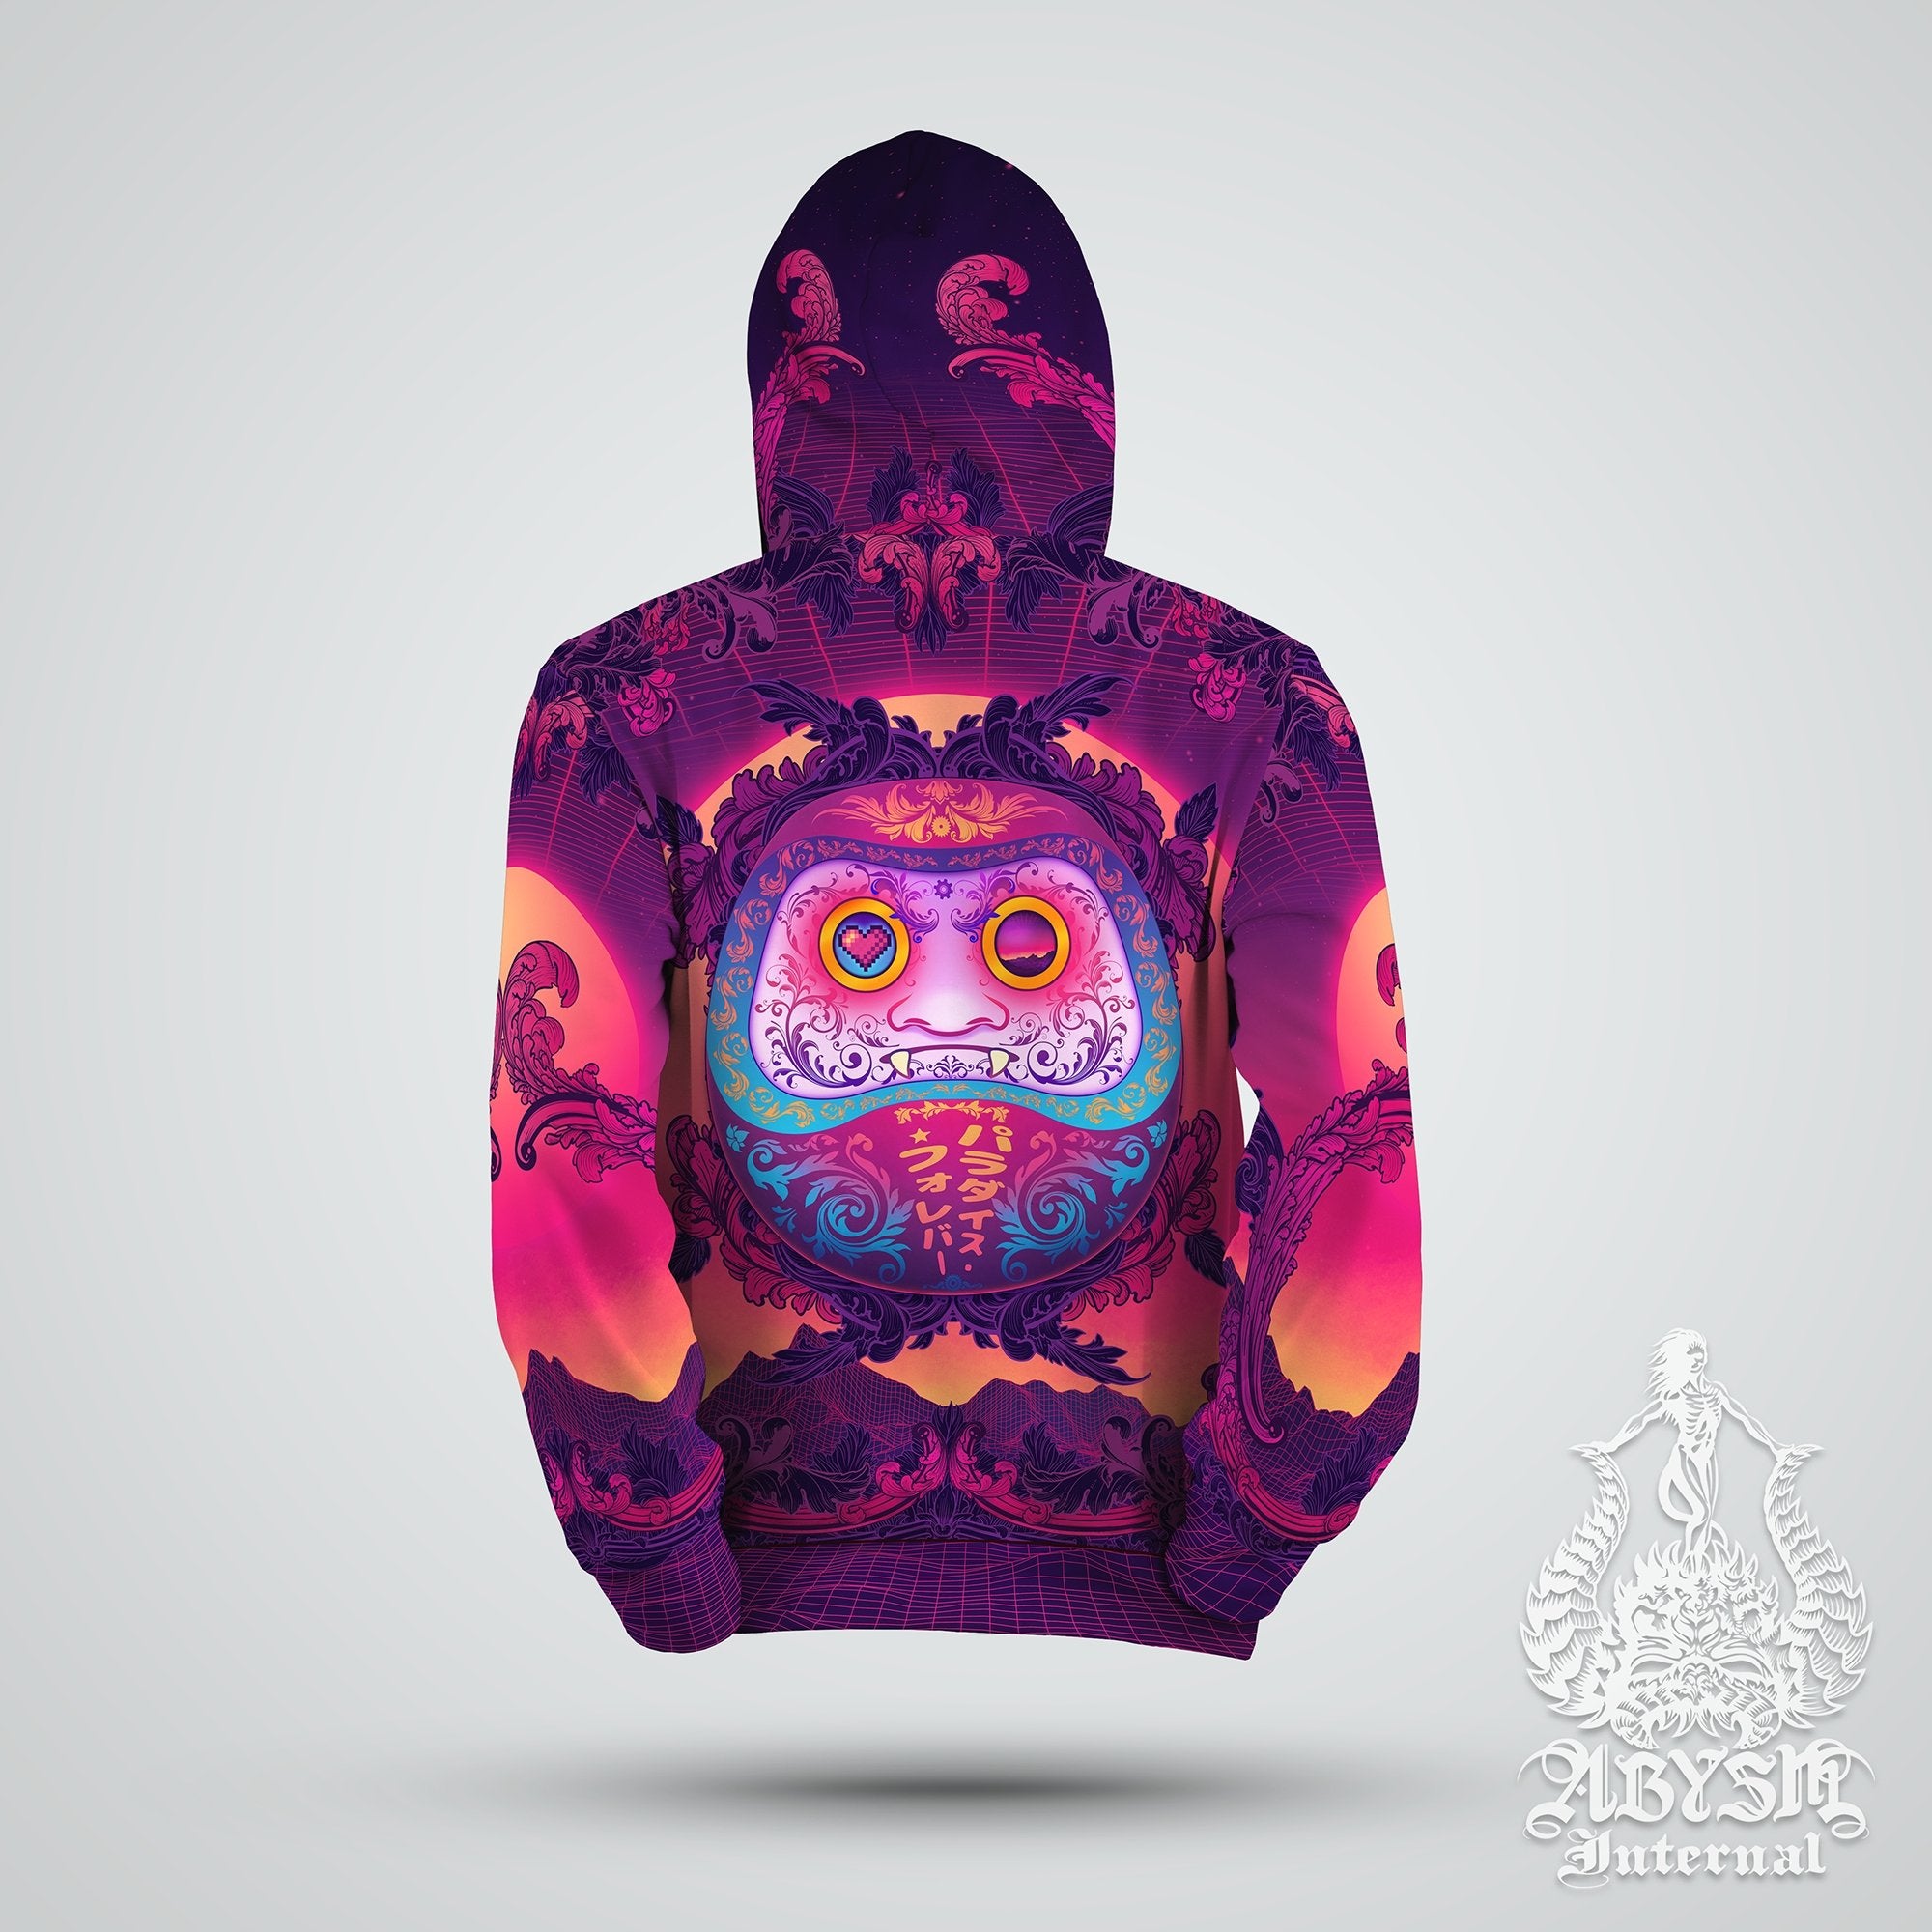 Japanese Vaporwave Hoodie, Trippy Outfit, Psychedelic Streetwear, Synthwave Festival, Alternative Clothing, Unisex Gift for Gamers, Anime & Manga fans - Retrowave Daruma - Abysm Internal